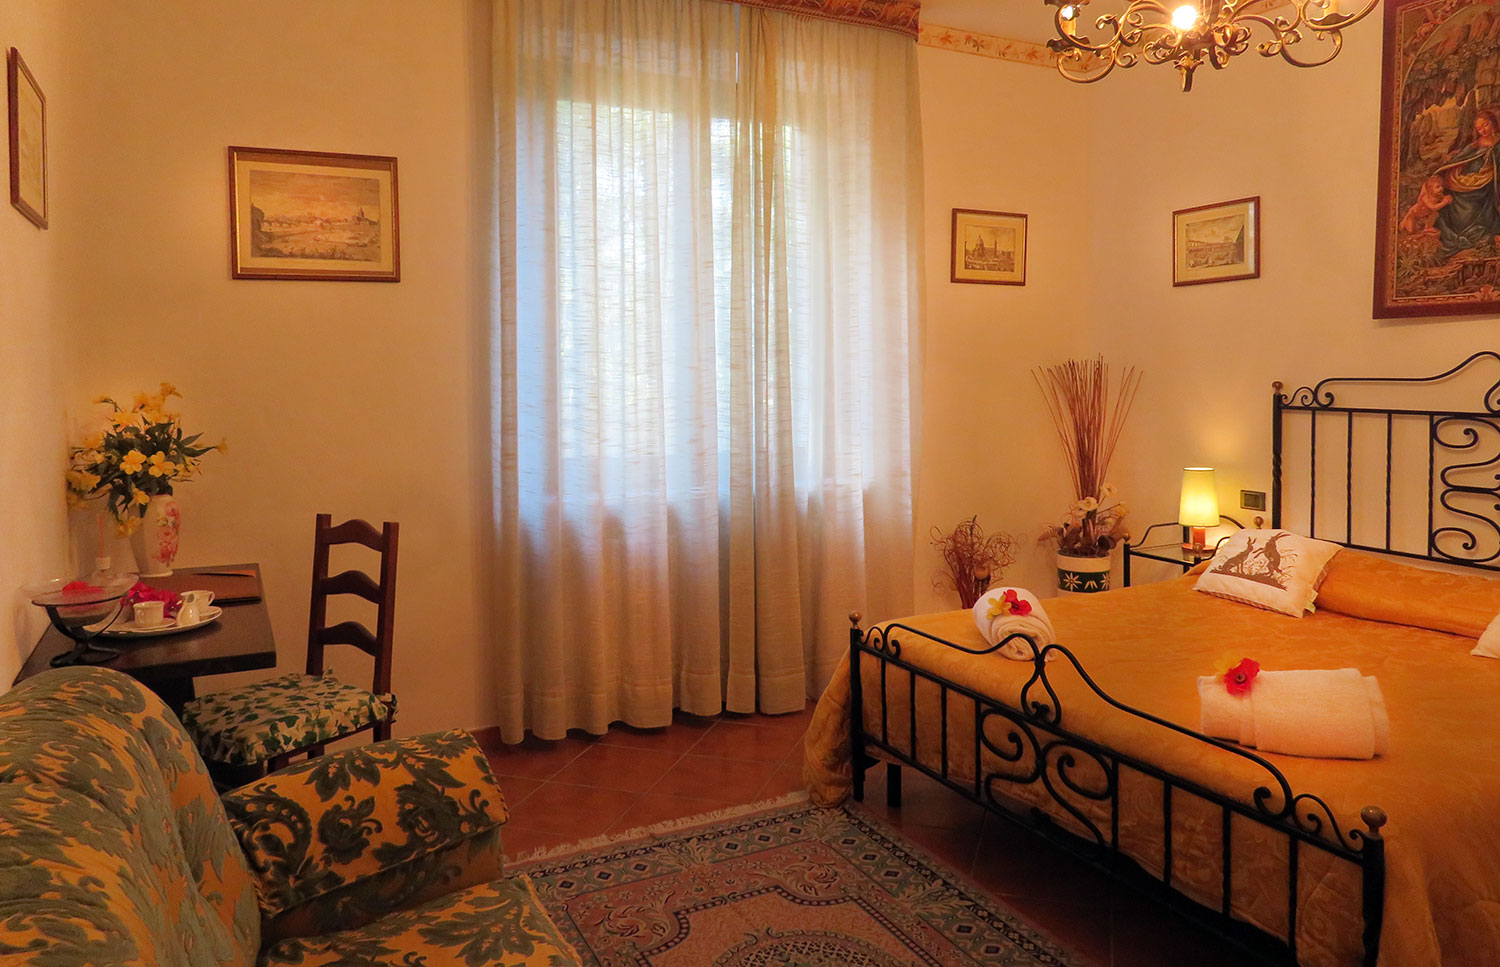 Vacation apartments in Chianti